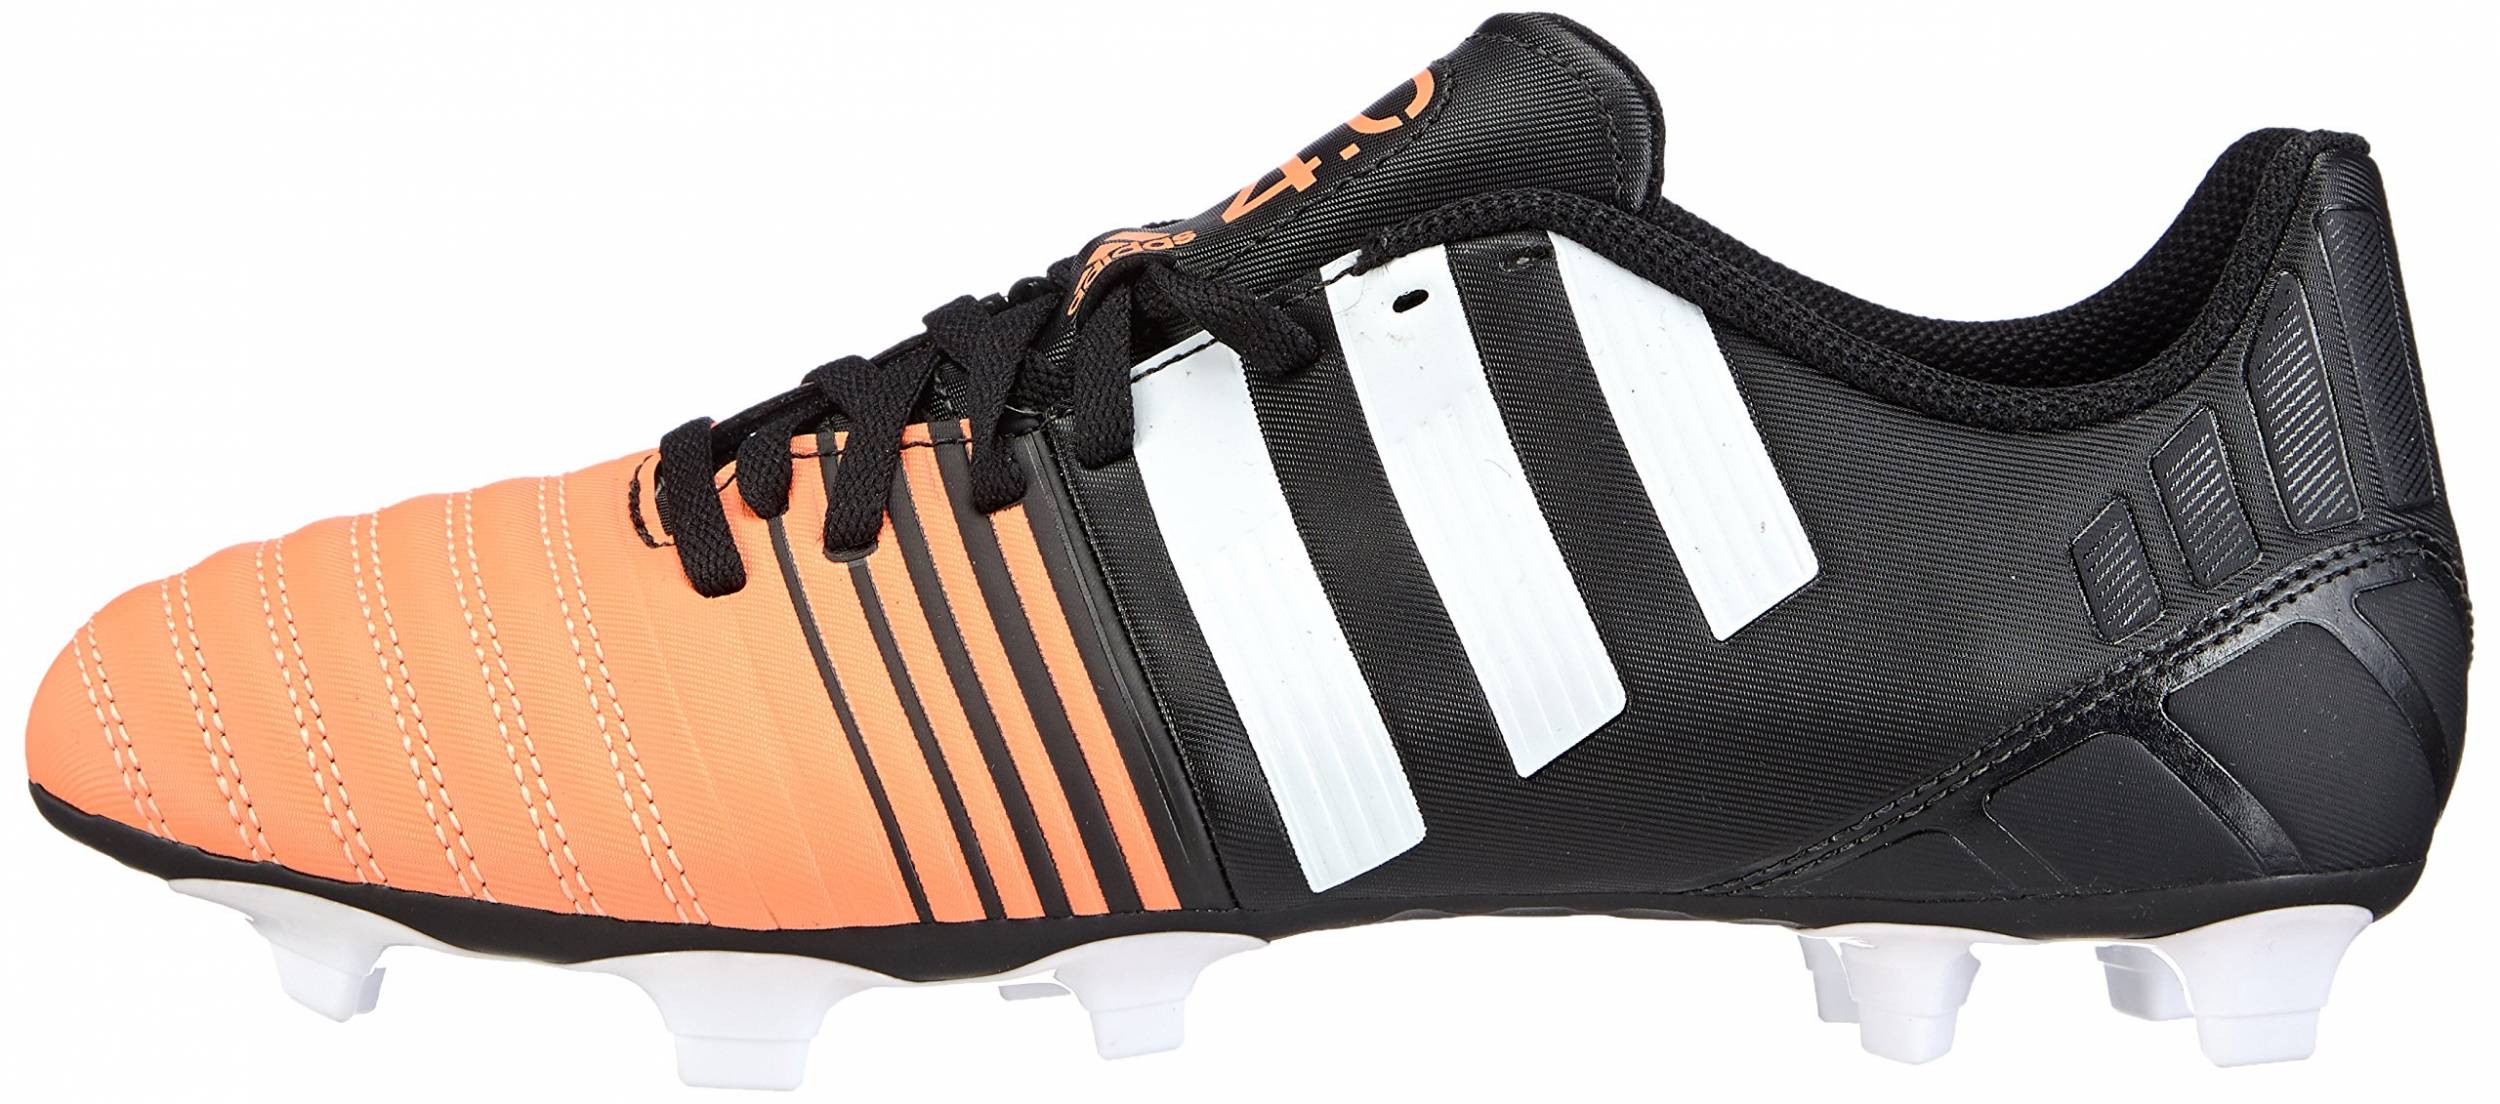 adidas nitrocharge rugby boots